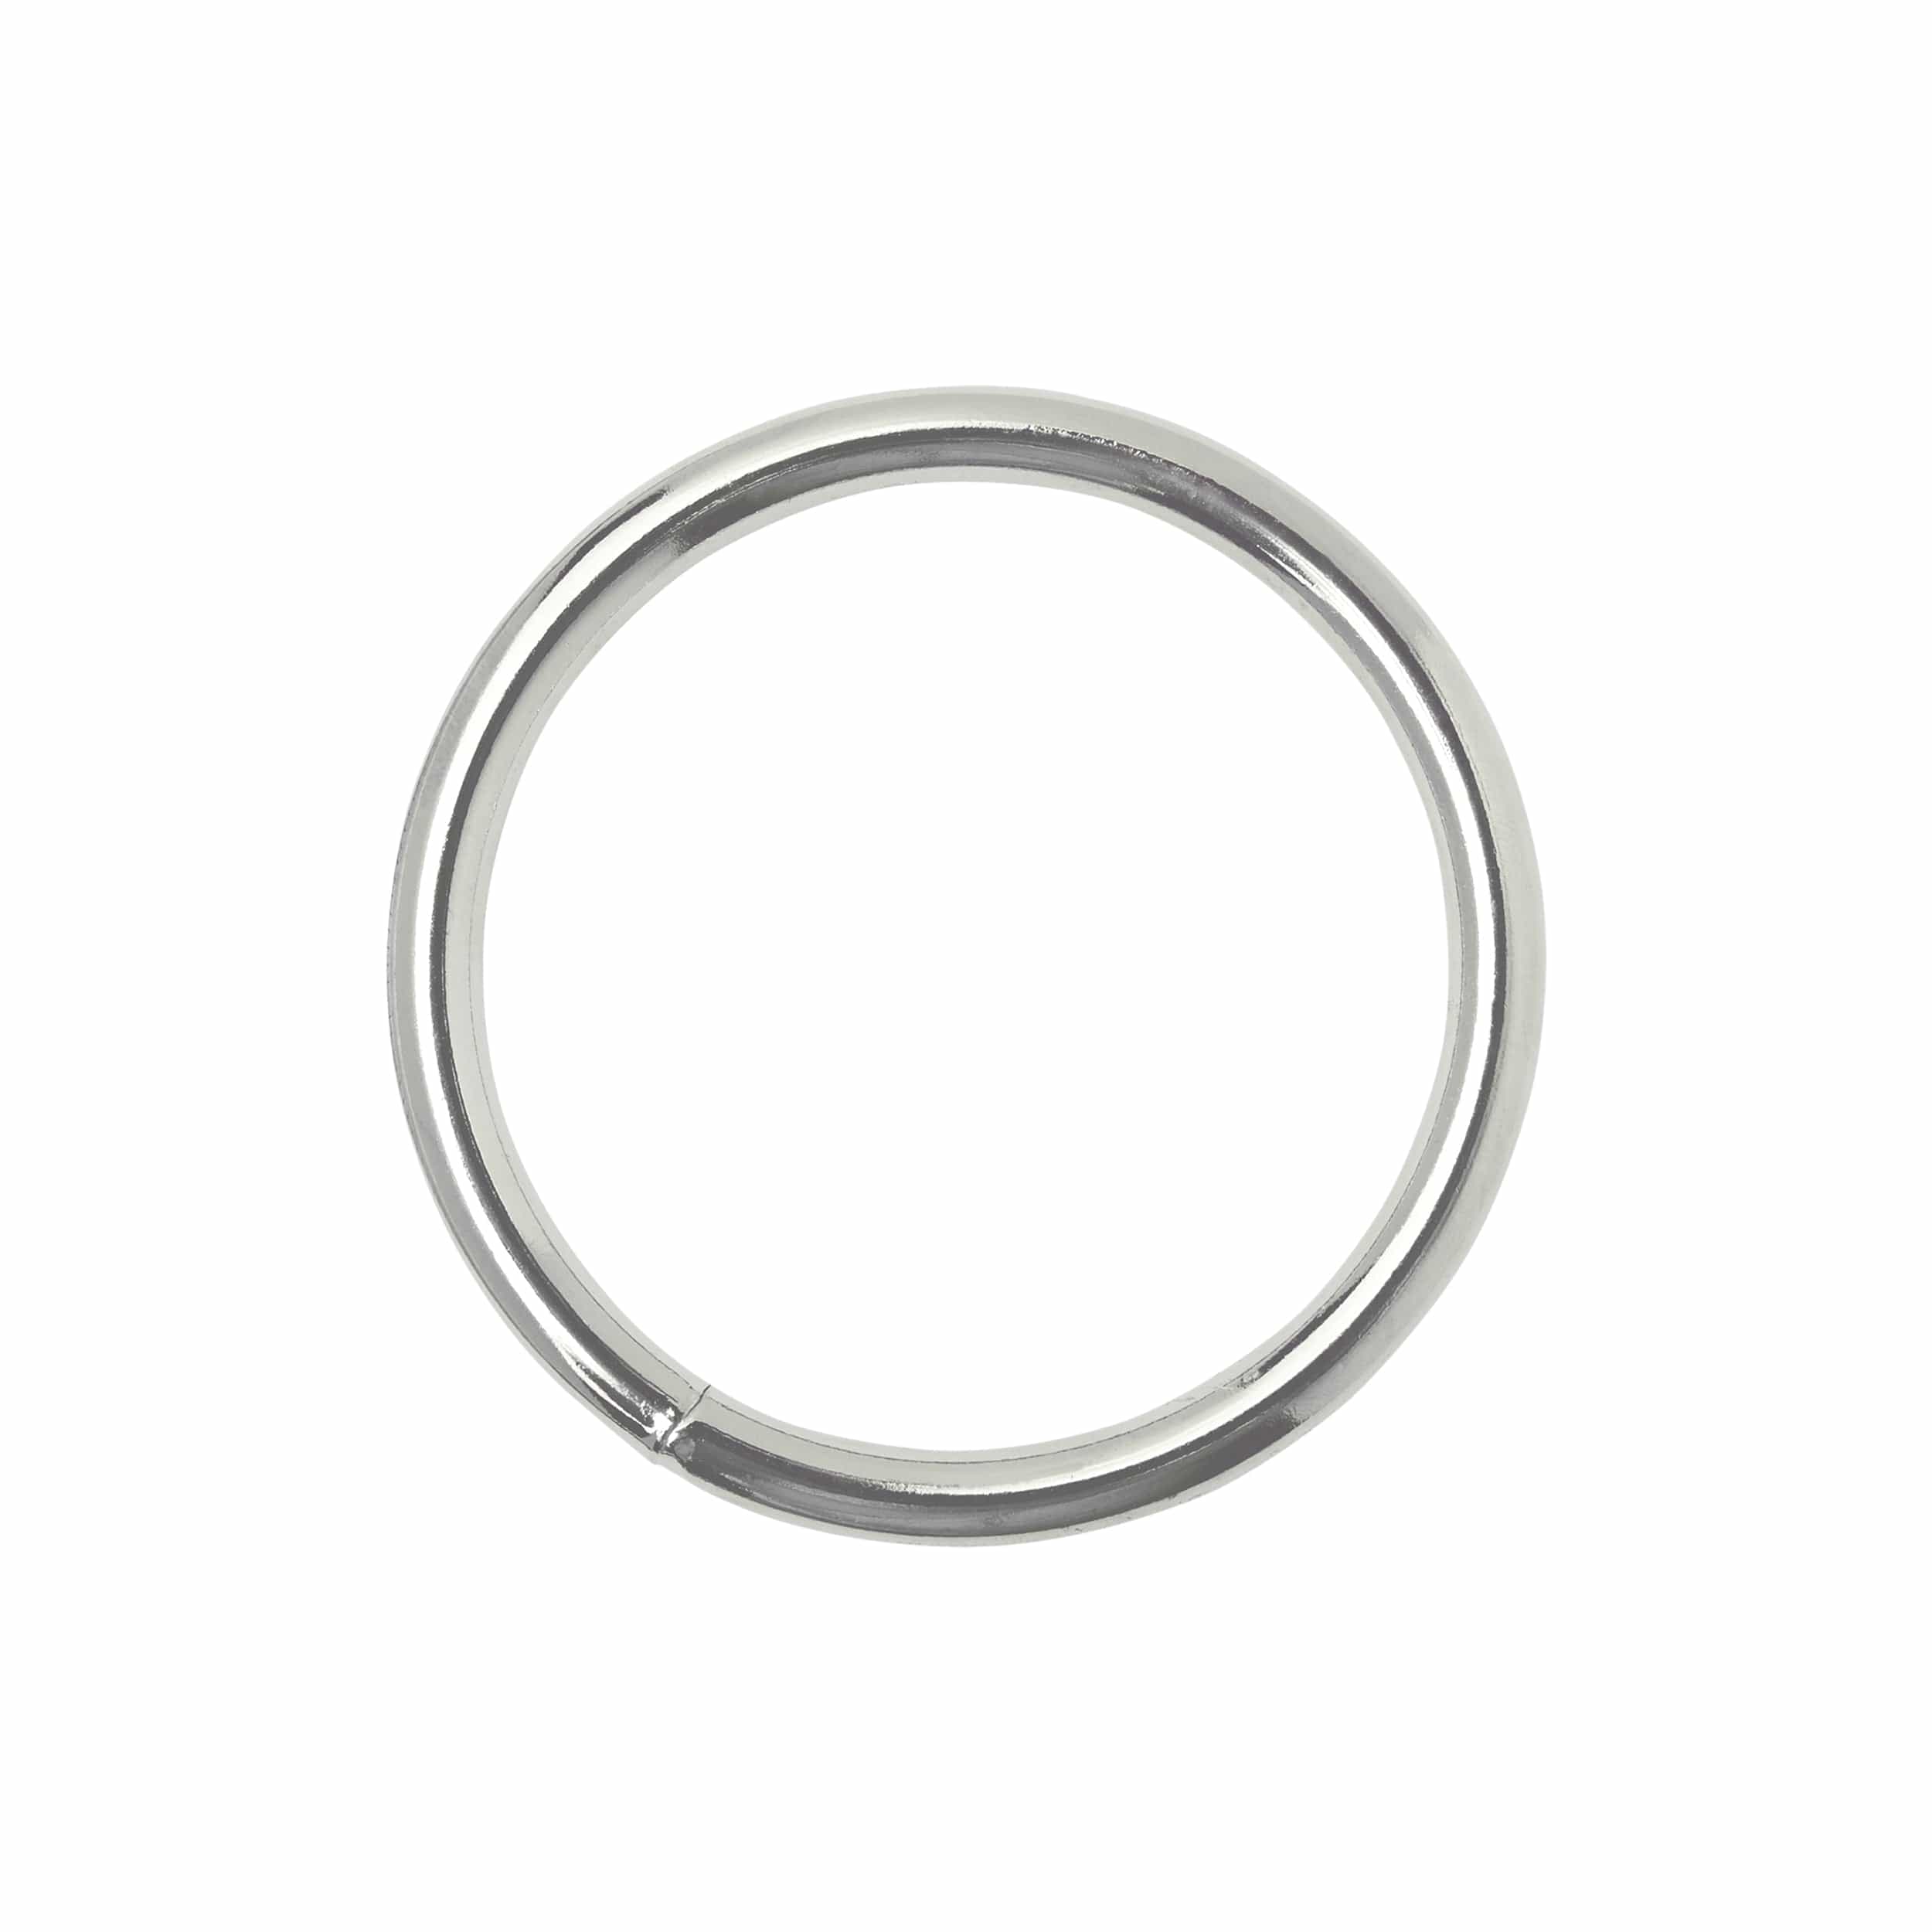 Welded Metal Ring - Oval Ring